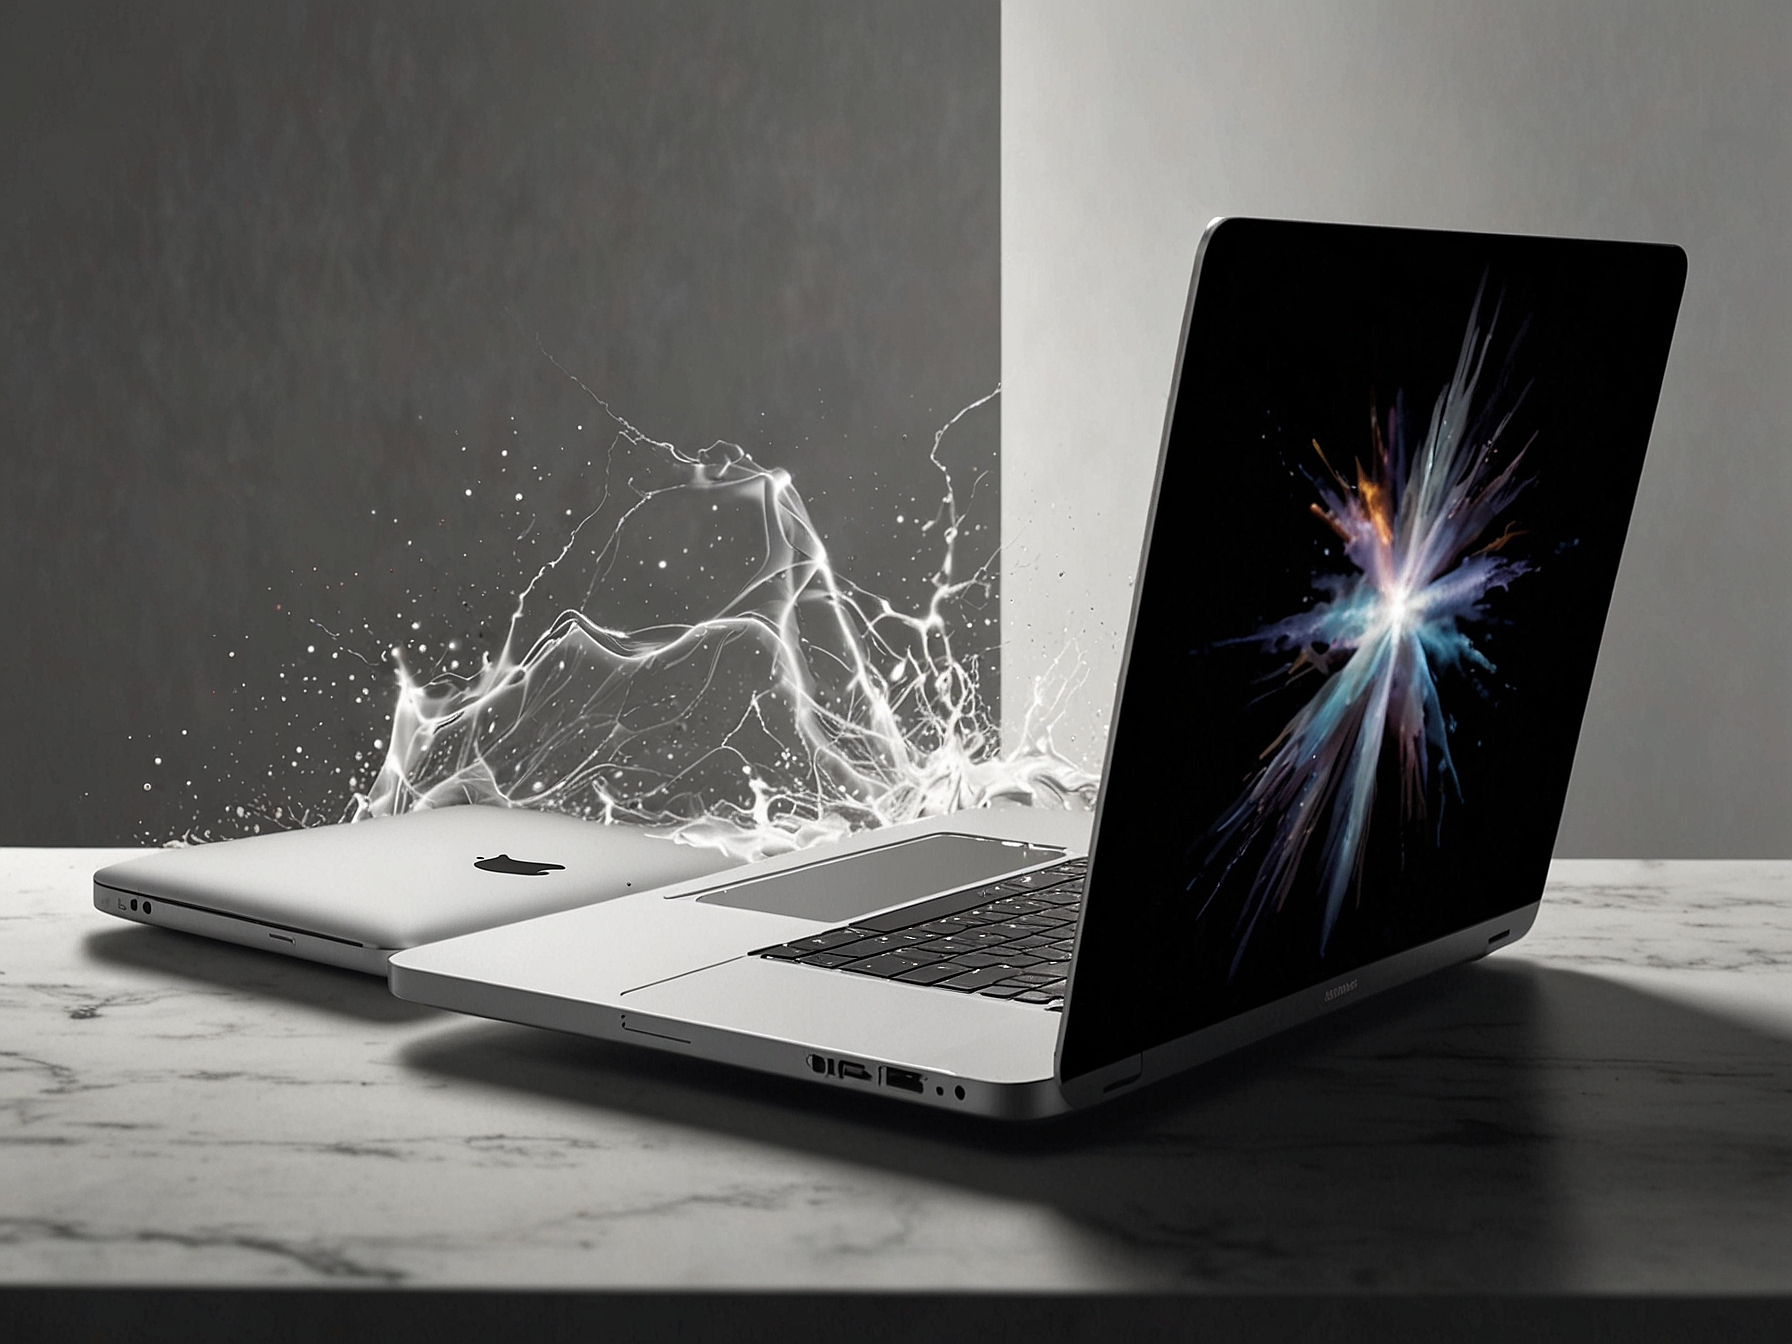 The new M4 MacBook Pro expected to be released during the holiday season, highlighting its powerful performance, optimized for demanding applications, and superior graphics capabilities.